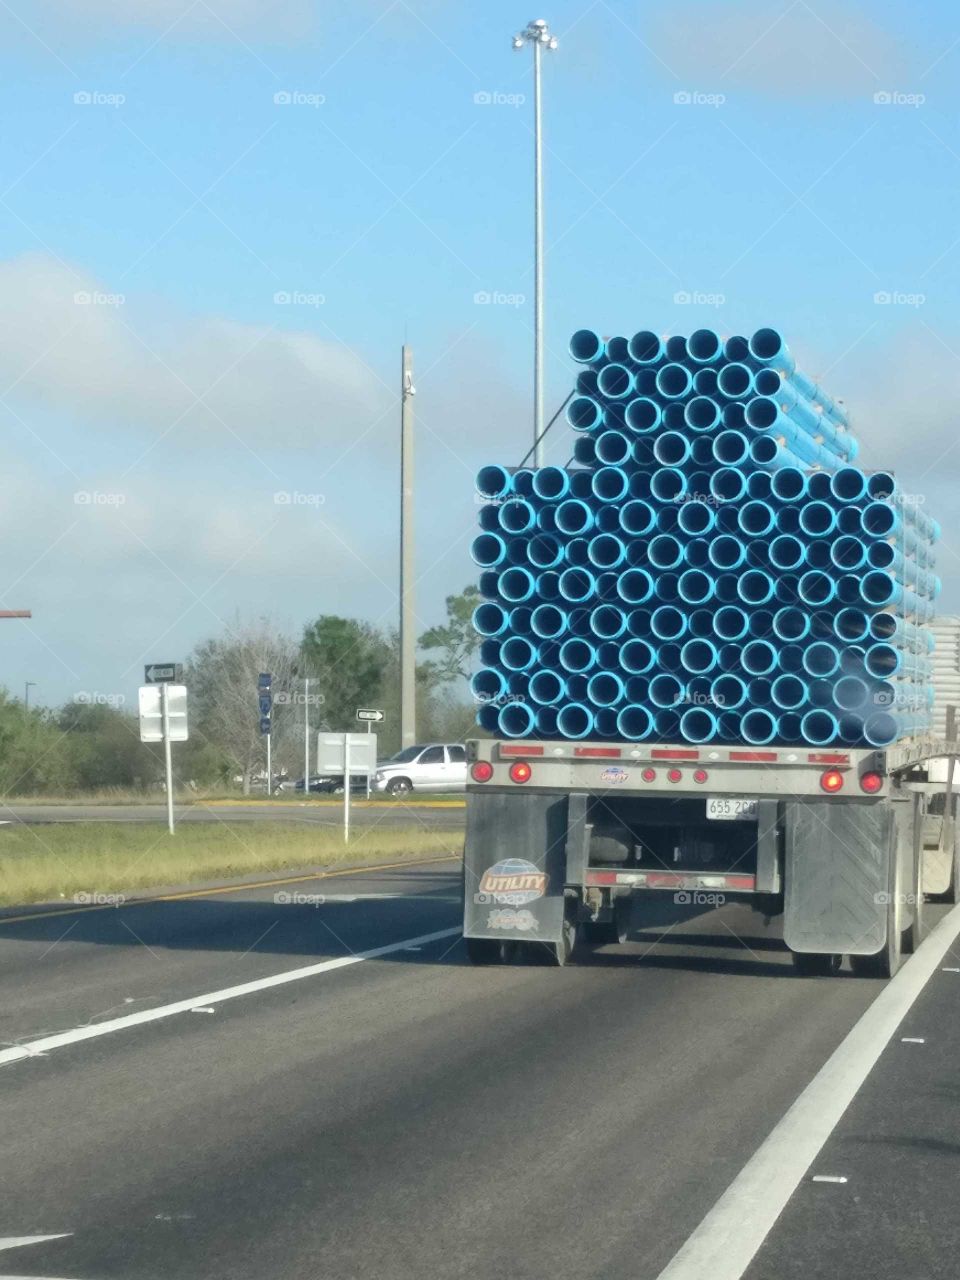 pipes on a truck